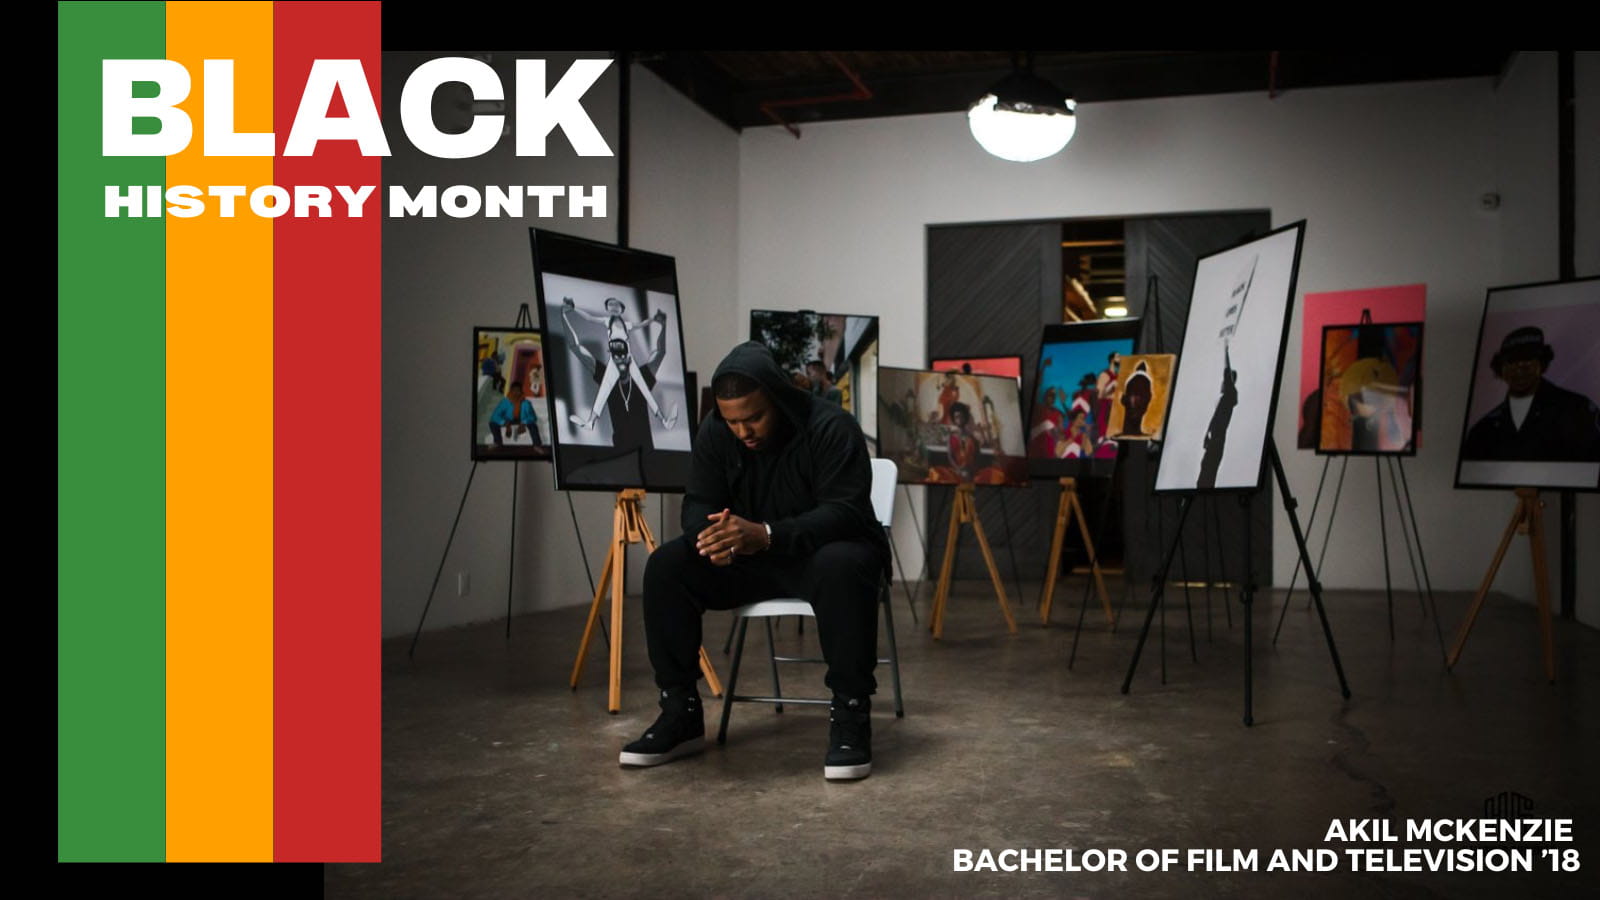 Black History Month | Akil McKenzie | Bachelor of Film and Television '18